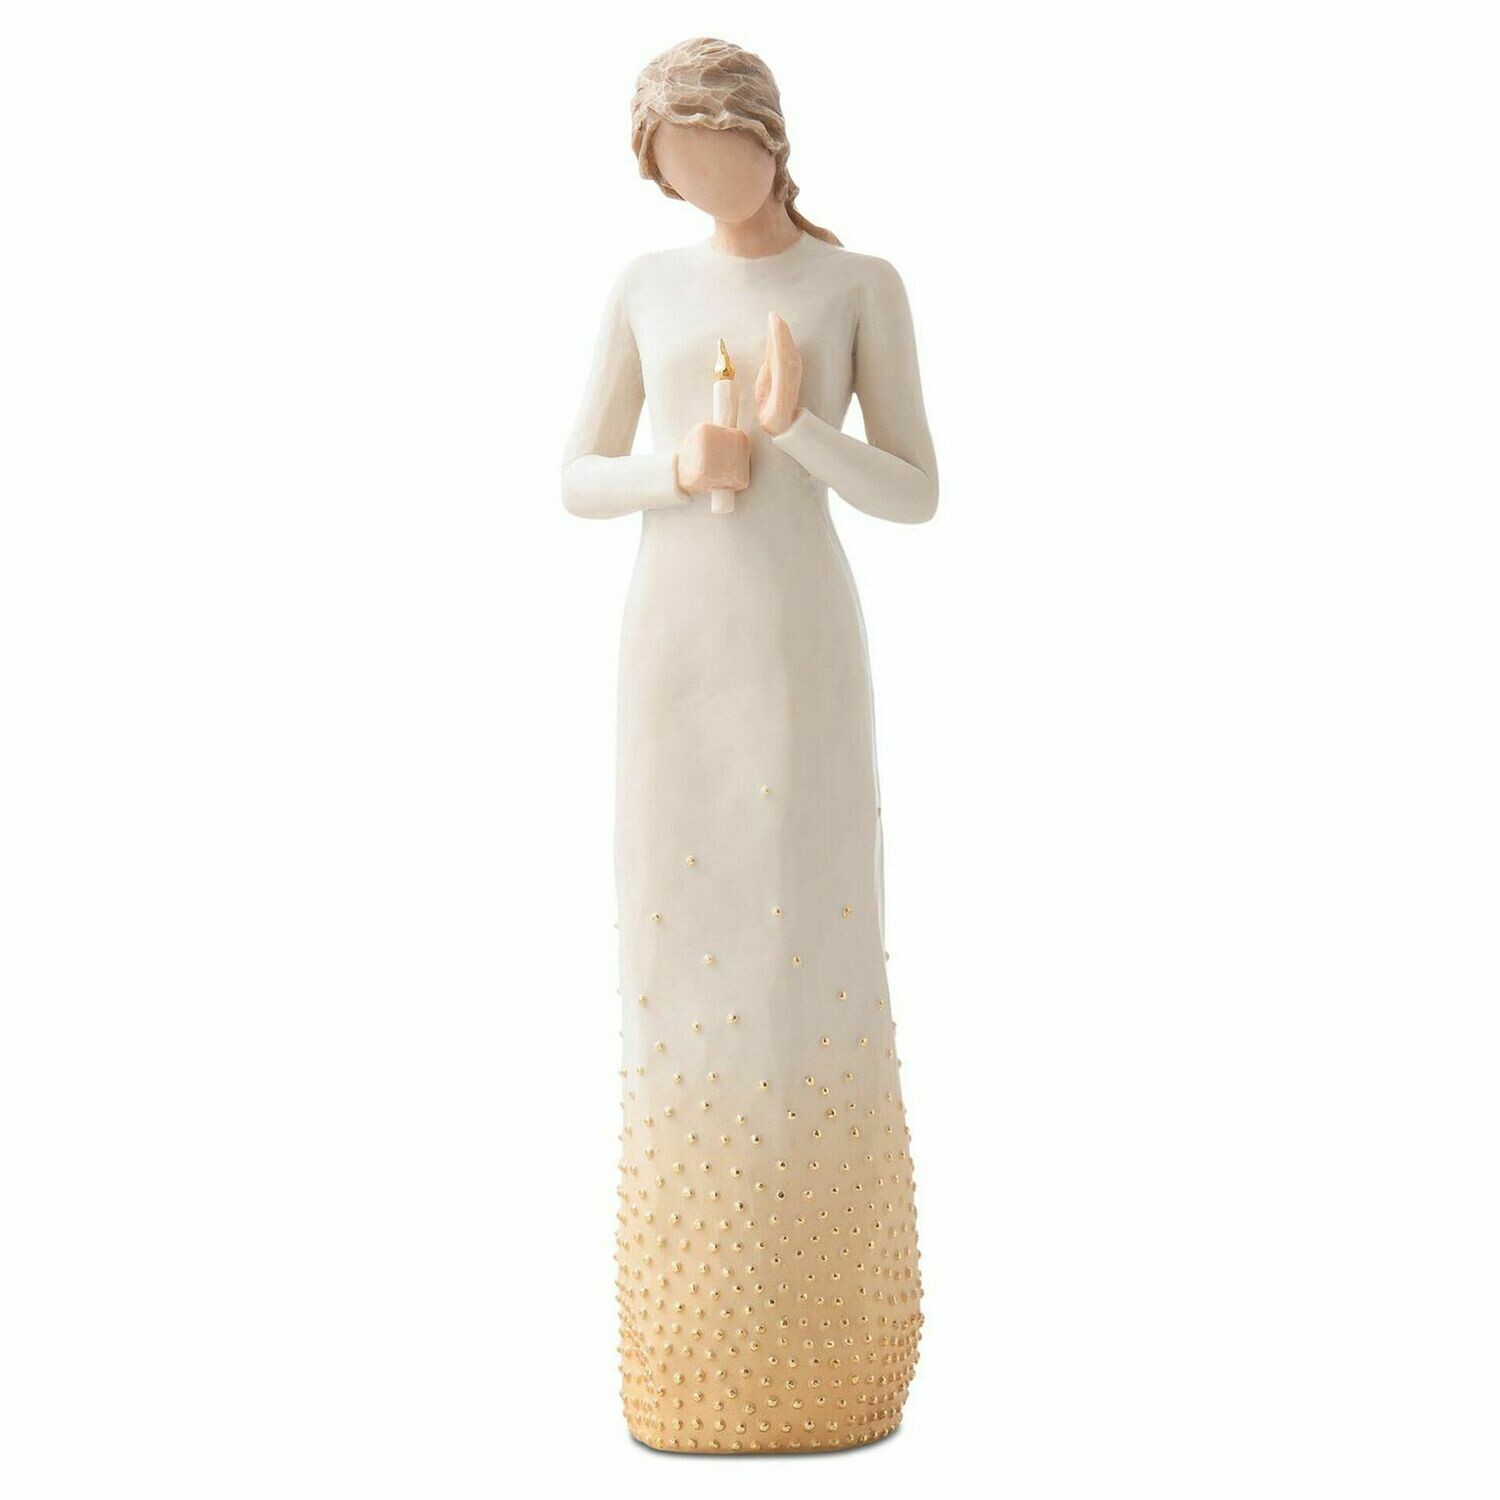 Willow Tree: Vigil - Woman with candle - applied gold leaf accents